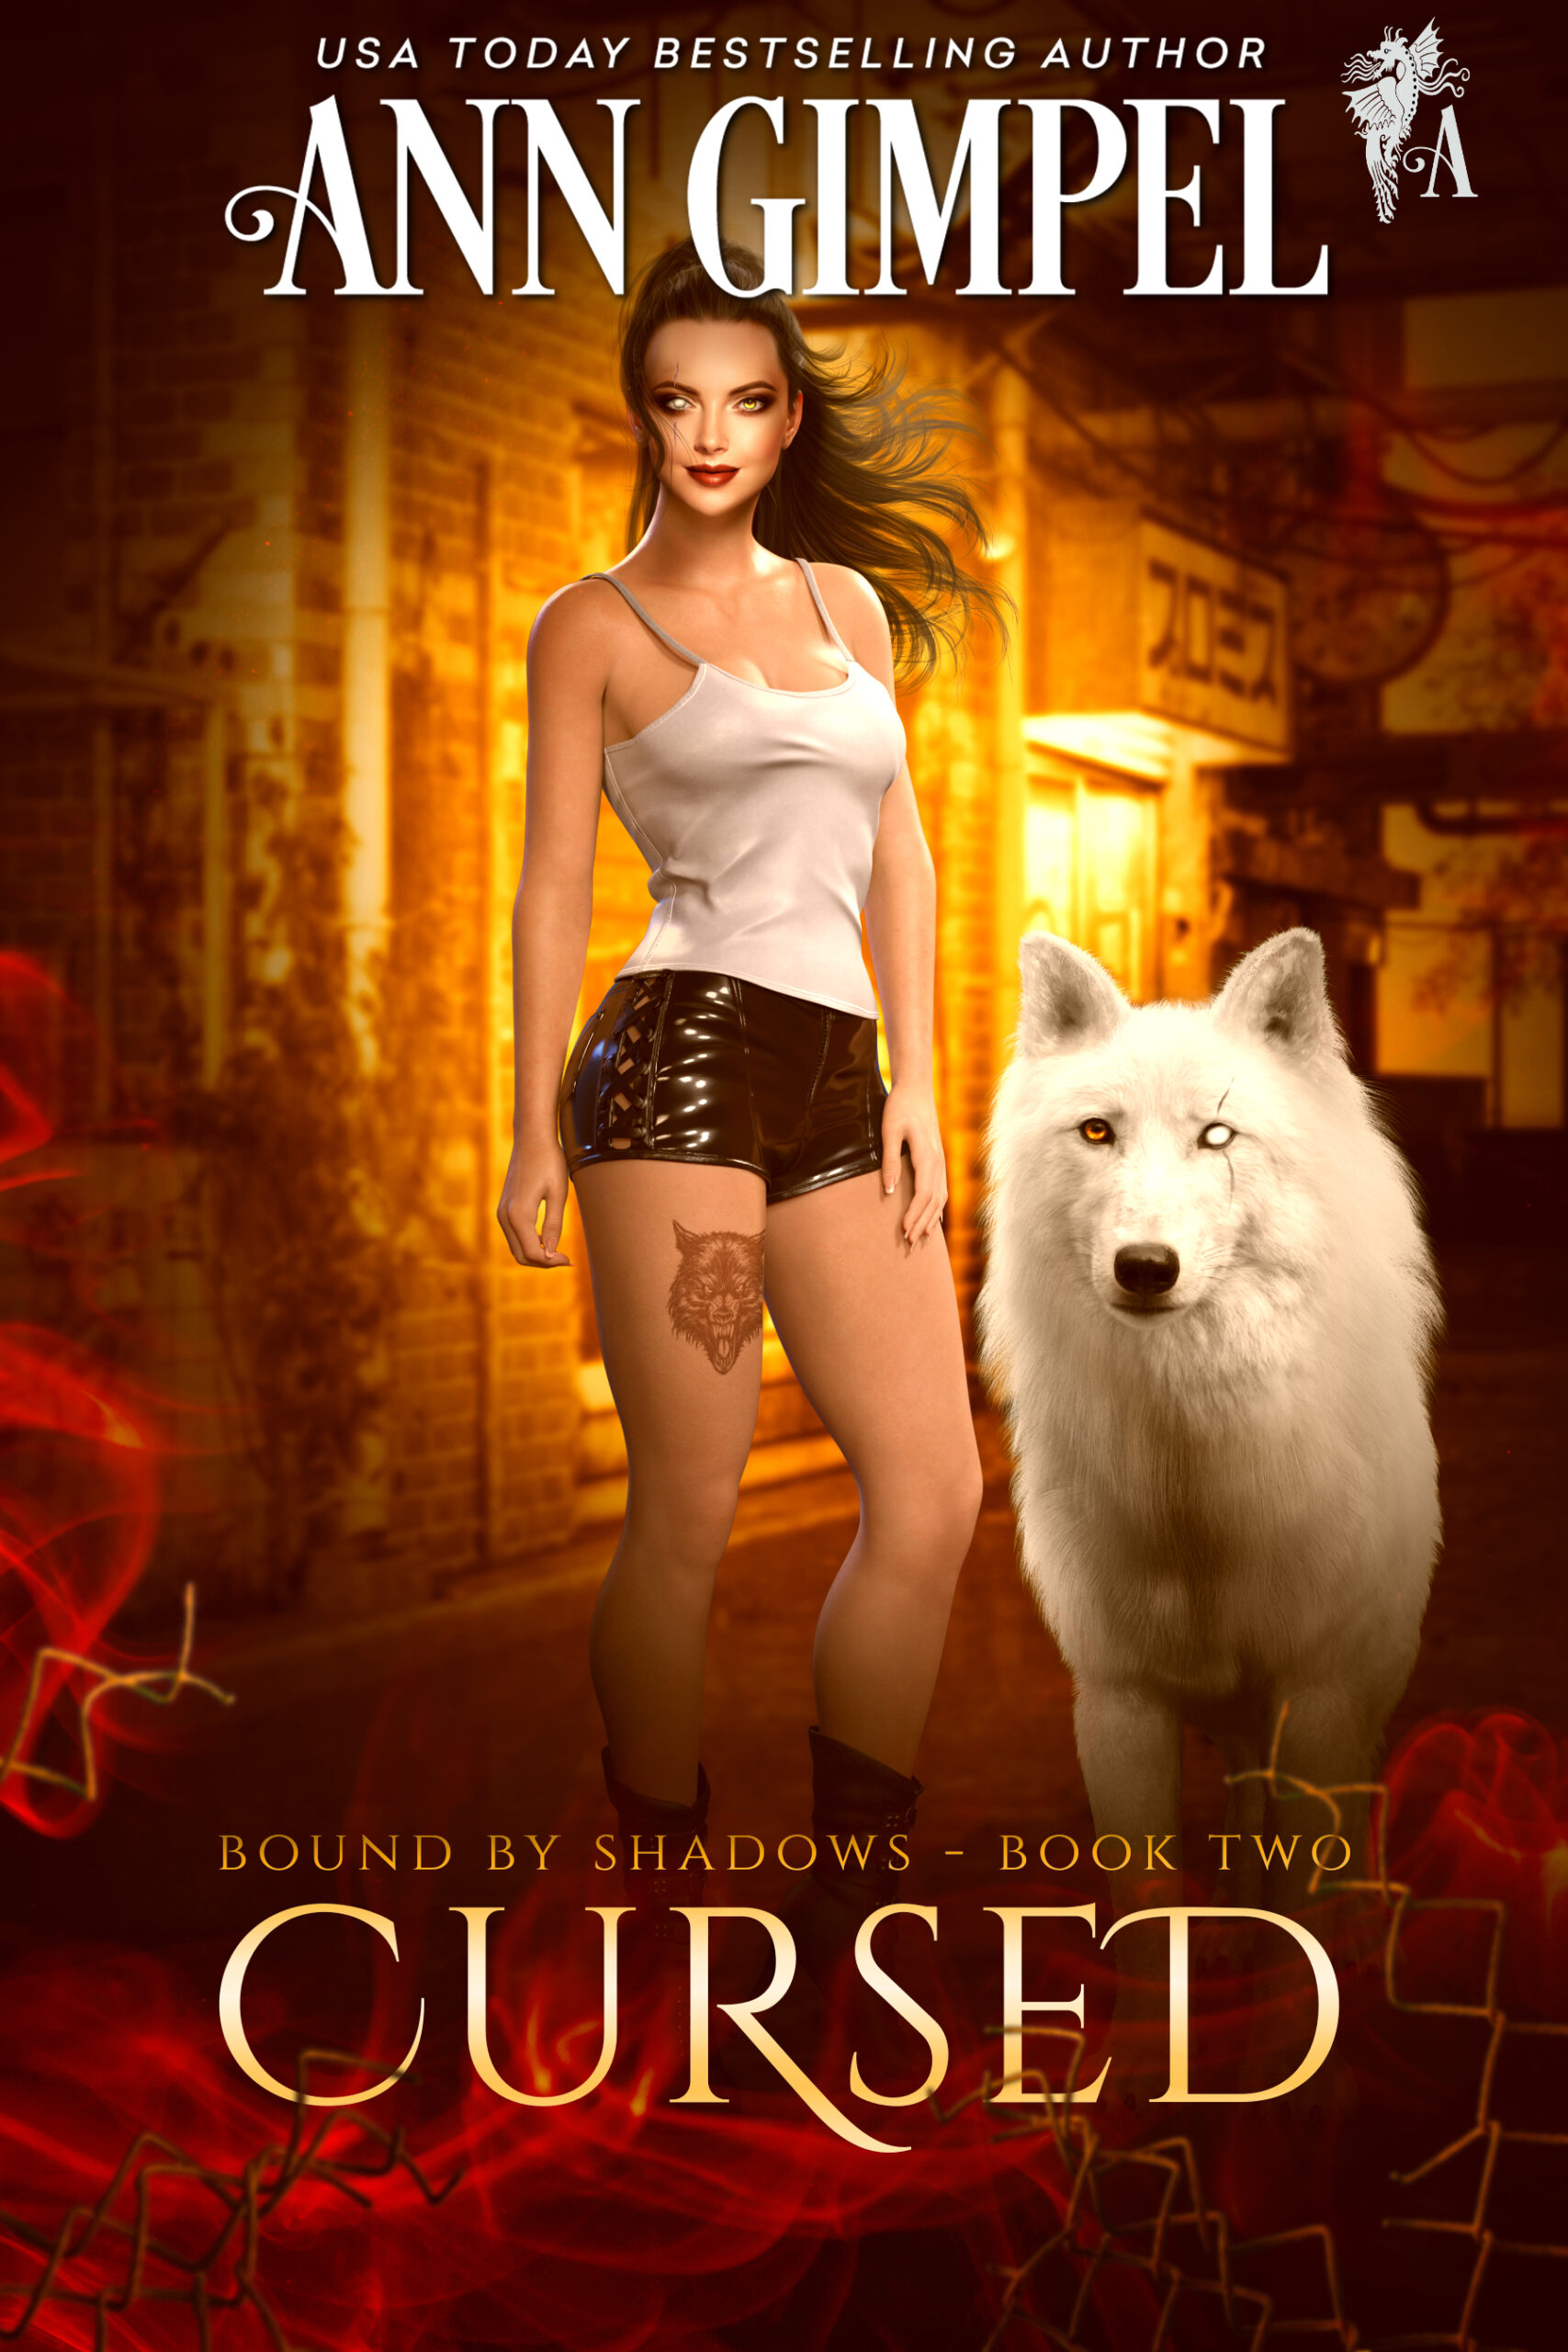 Cursed, Bound by Shadows Book Two